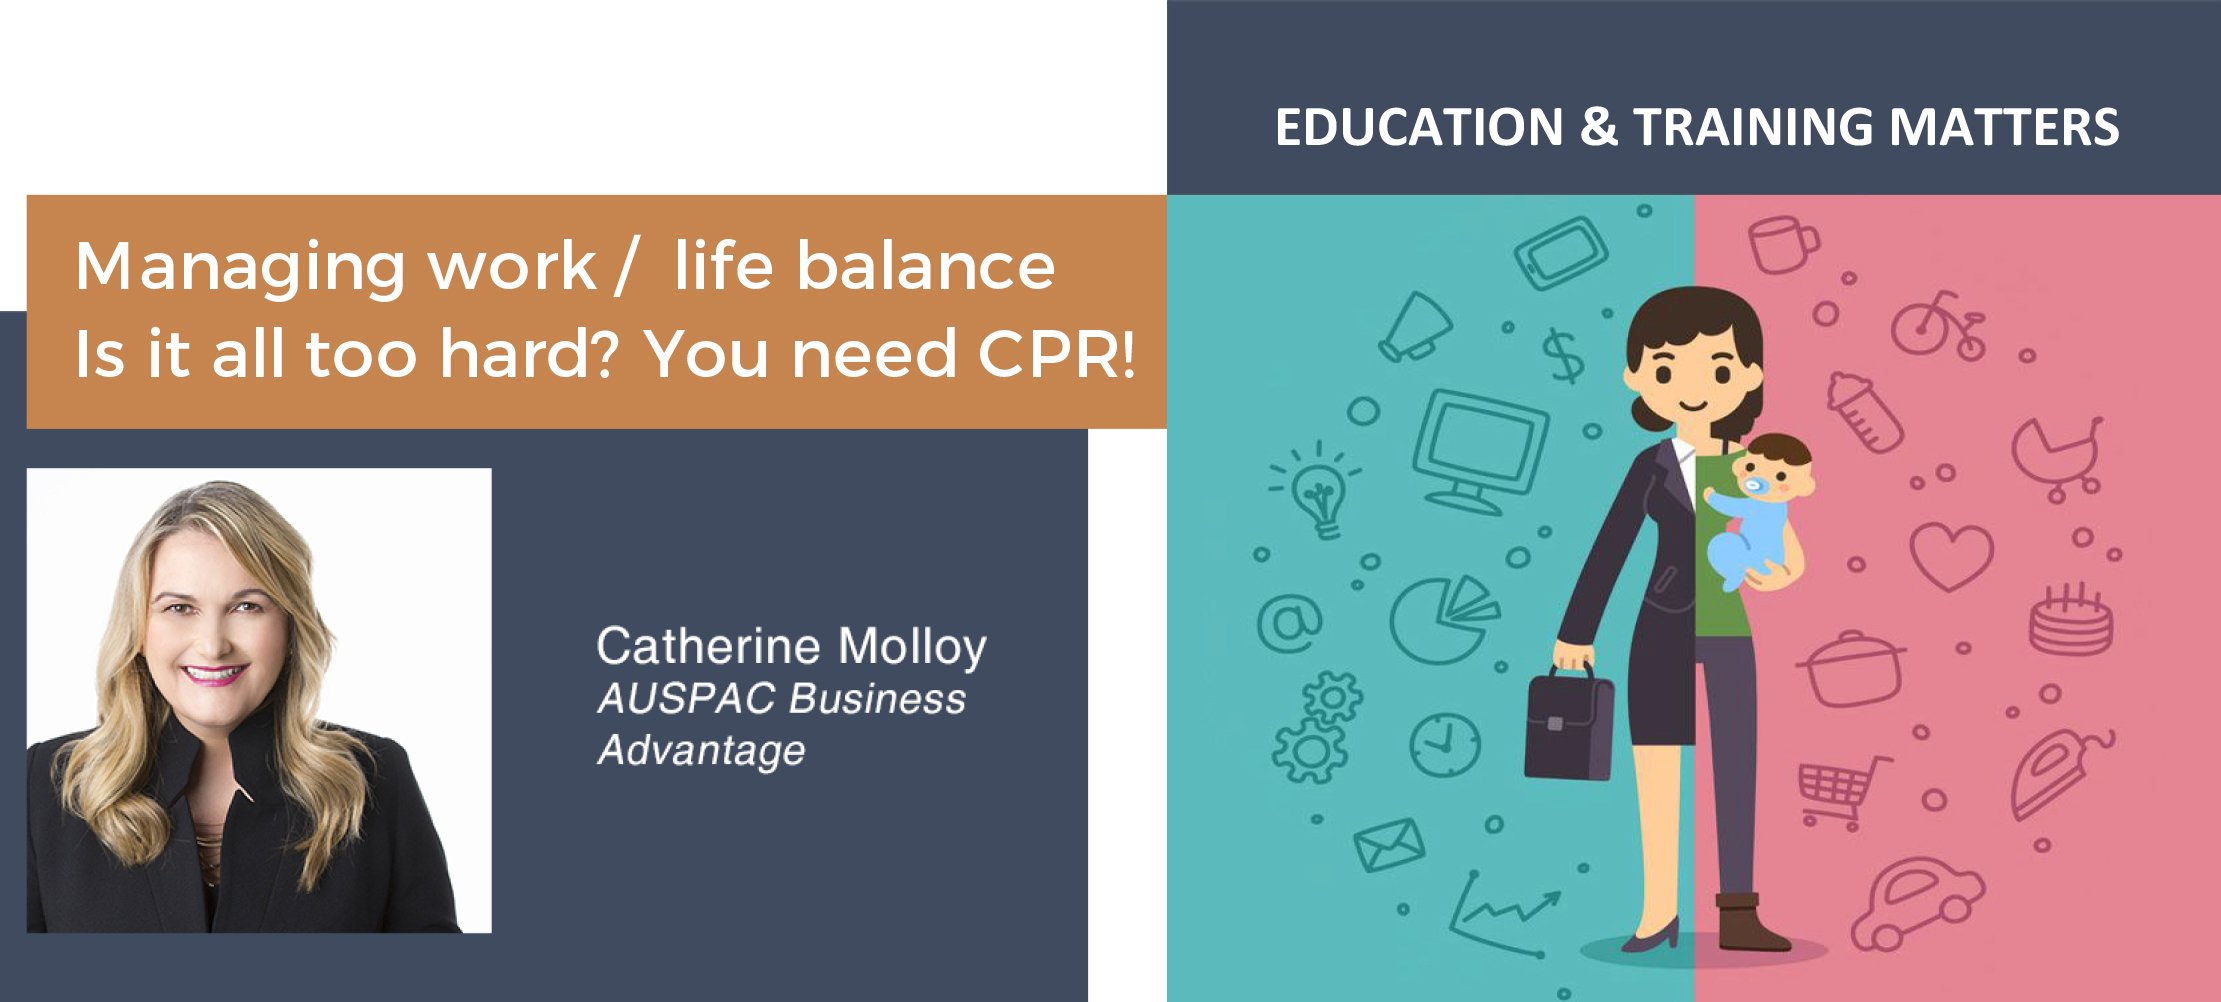 Managing work / life balance Is it all too hard? You need CPR!